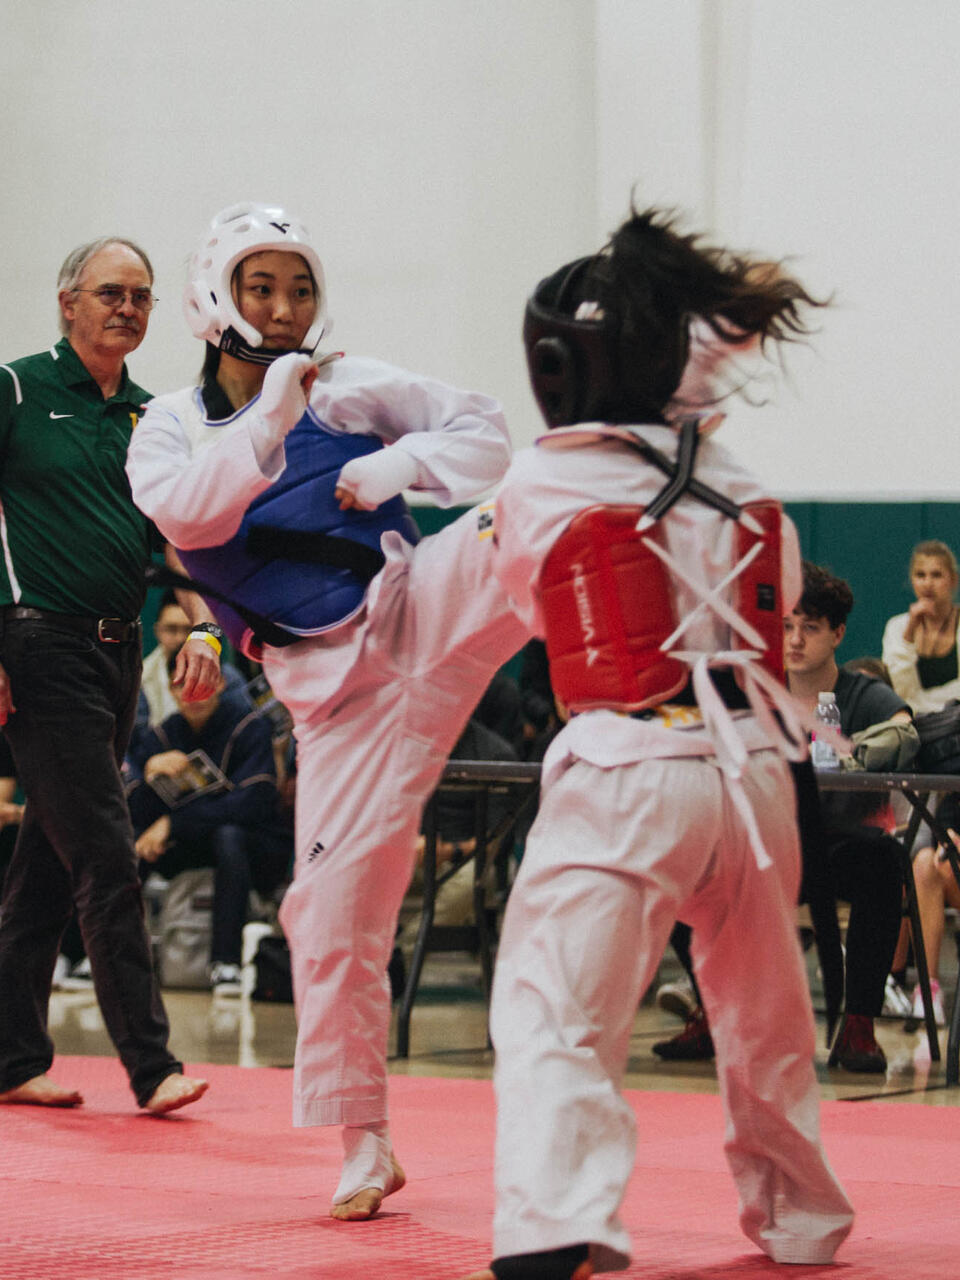 2 Taekwondo fighters with head gear sparring on the mat